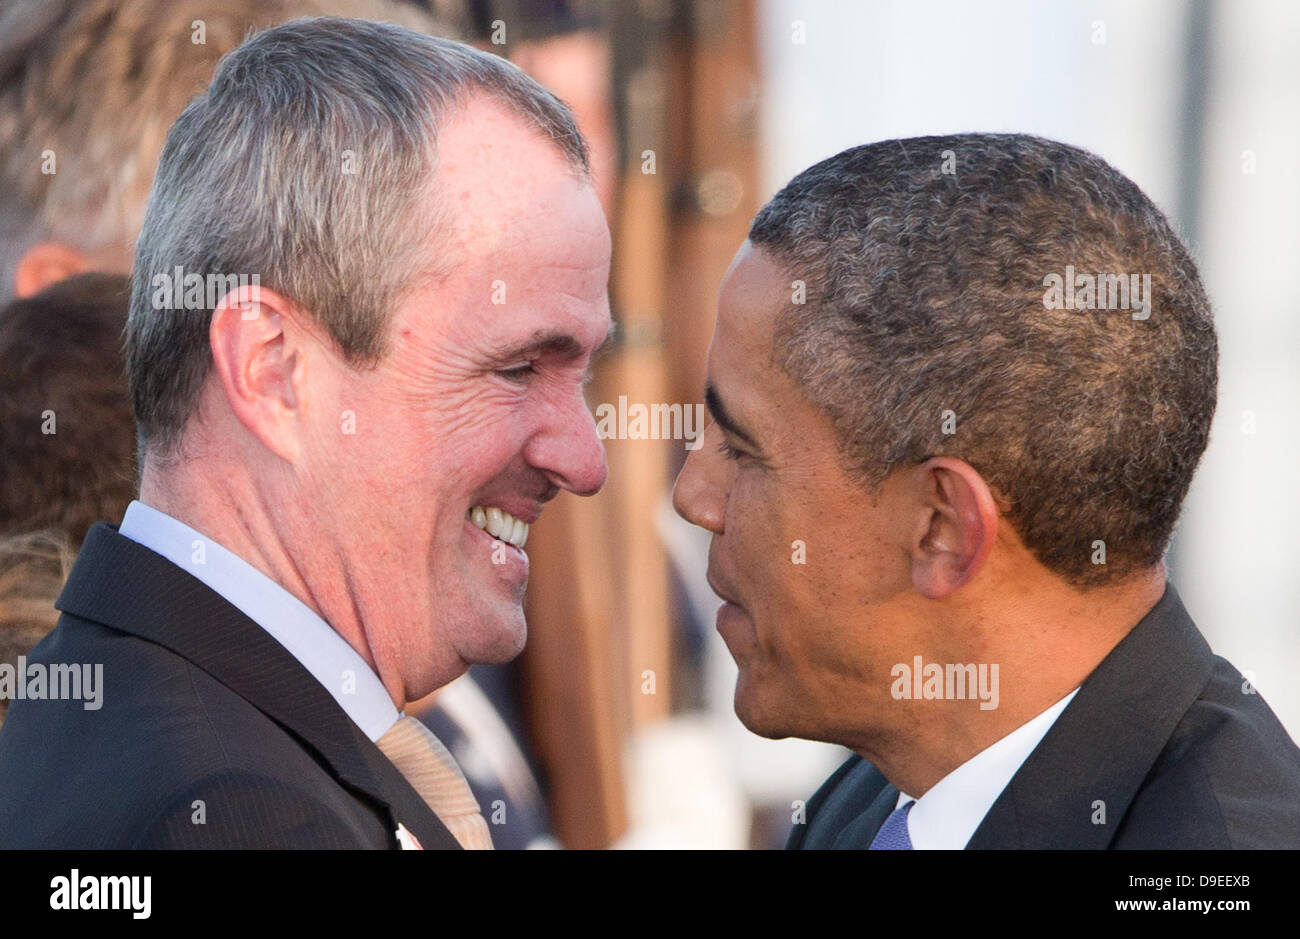 Berlin, Germany. 18th June, 2013. US President Barack Obama shares a smile with US Ambassador to Germany Philip D. Murphy upon his arrival at Tegel Airport in Berlin, Germany, 18 June 2013. Photo: Michael Kappeler/dpa /dpa/Alamy Live News Stock Photo